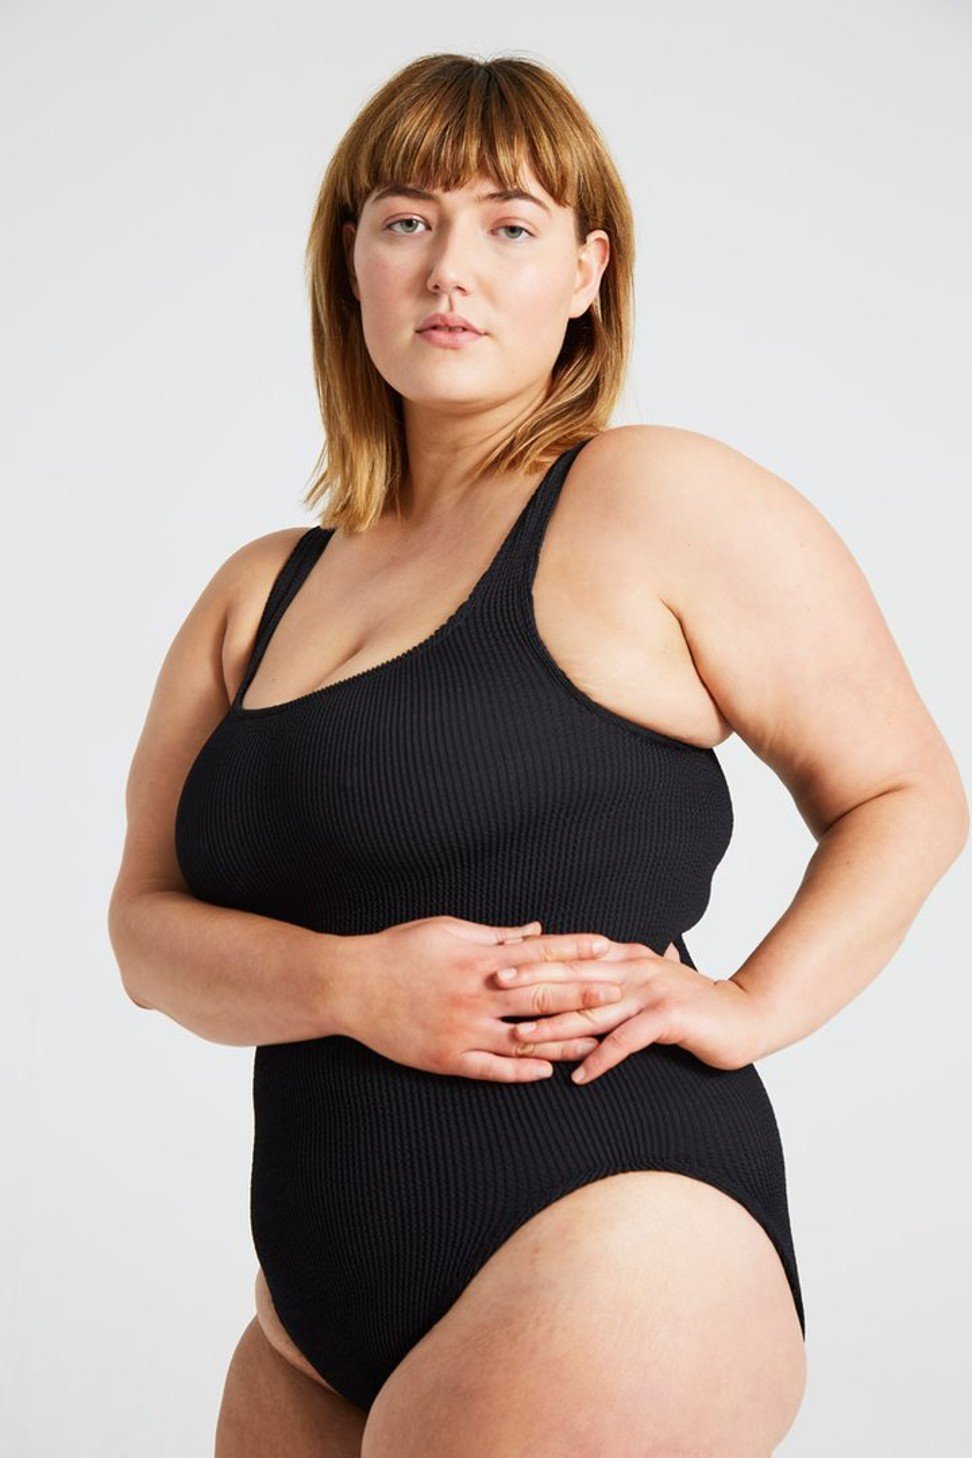 Plus-size, fuller bust: swimwear choices for women grow thanks to